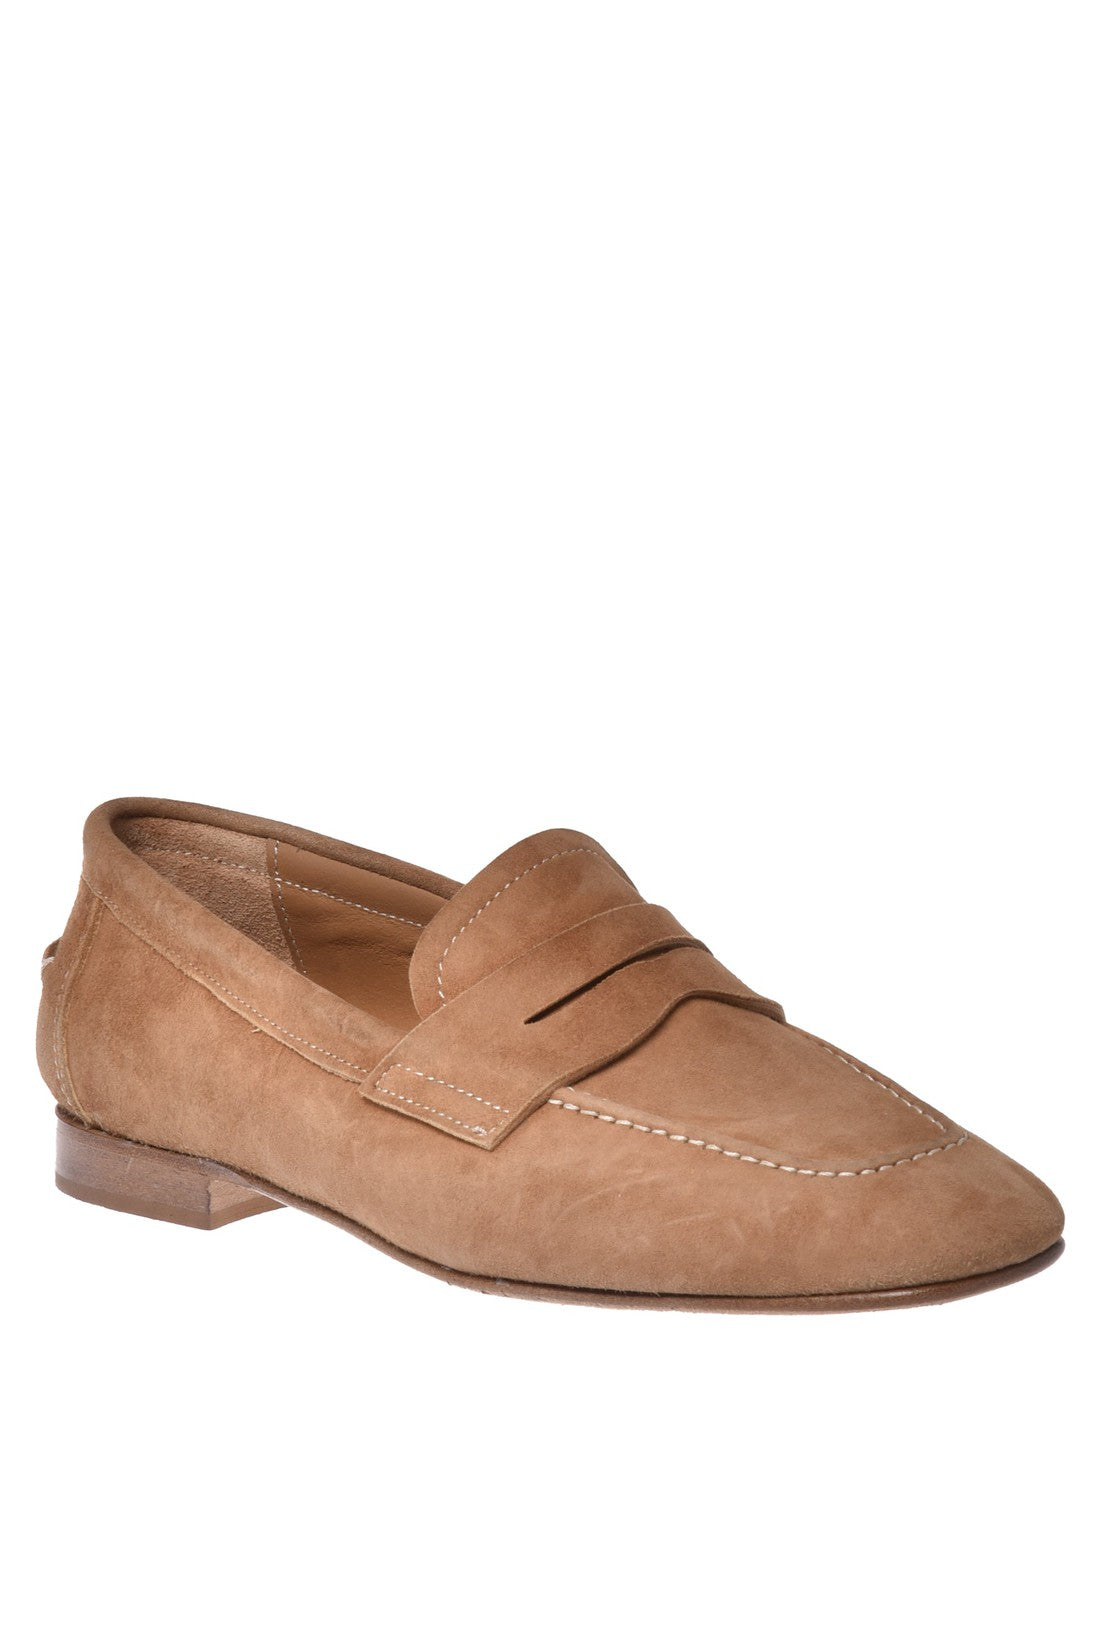 BALDININI-OUTLET-SALE-Tan-suede-loafer-Halbschuhe-35-ARCHIVE-COLLECTION_adee18f1-dd08-48cc-a854-6fec140251c0.jpg